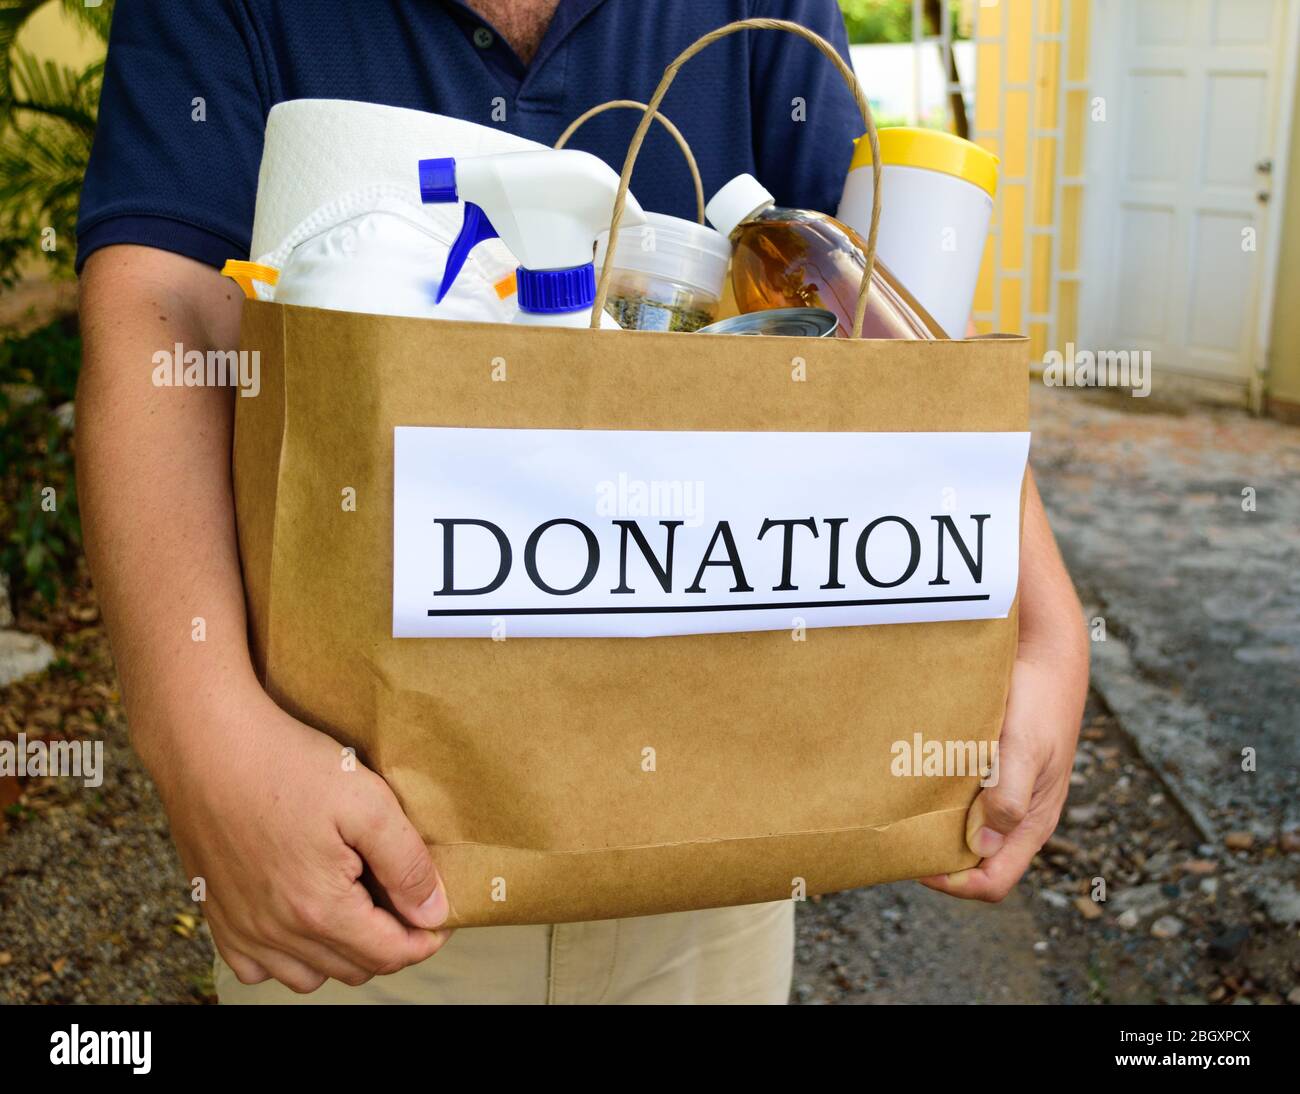 A volunteer delivers a donation bag filled with food and cleaning supplies during the Covid-19 / Coronavirus Pandemic Stock Photo